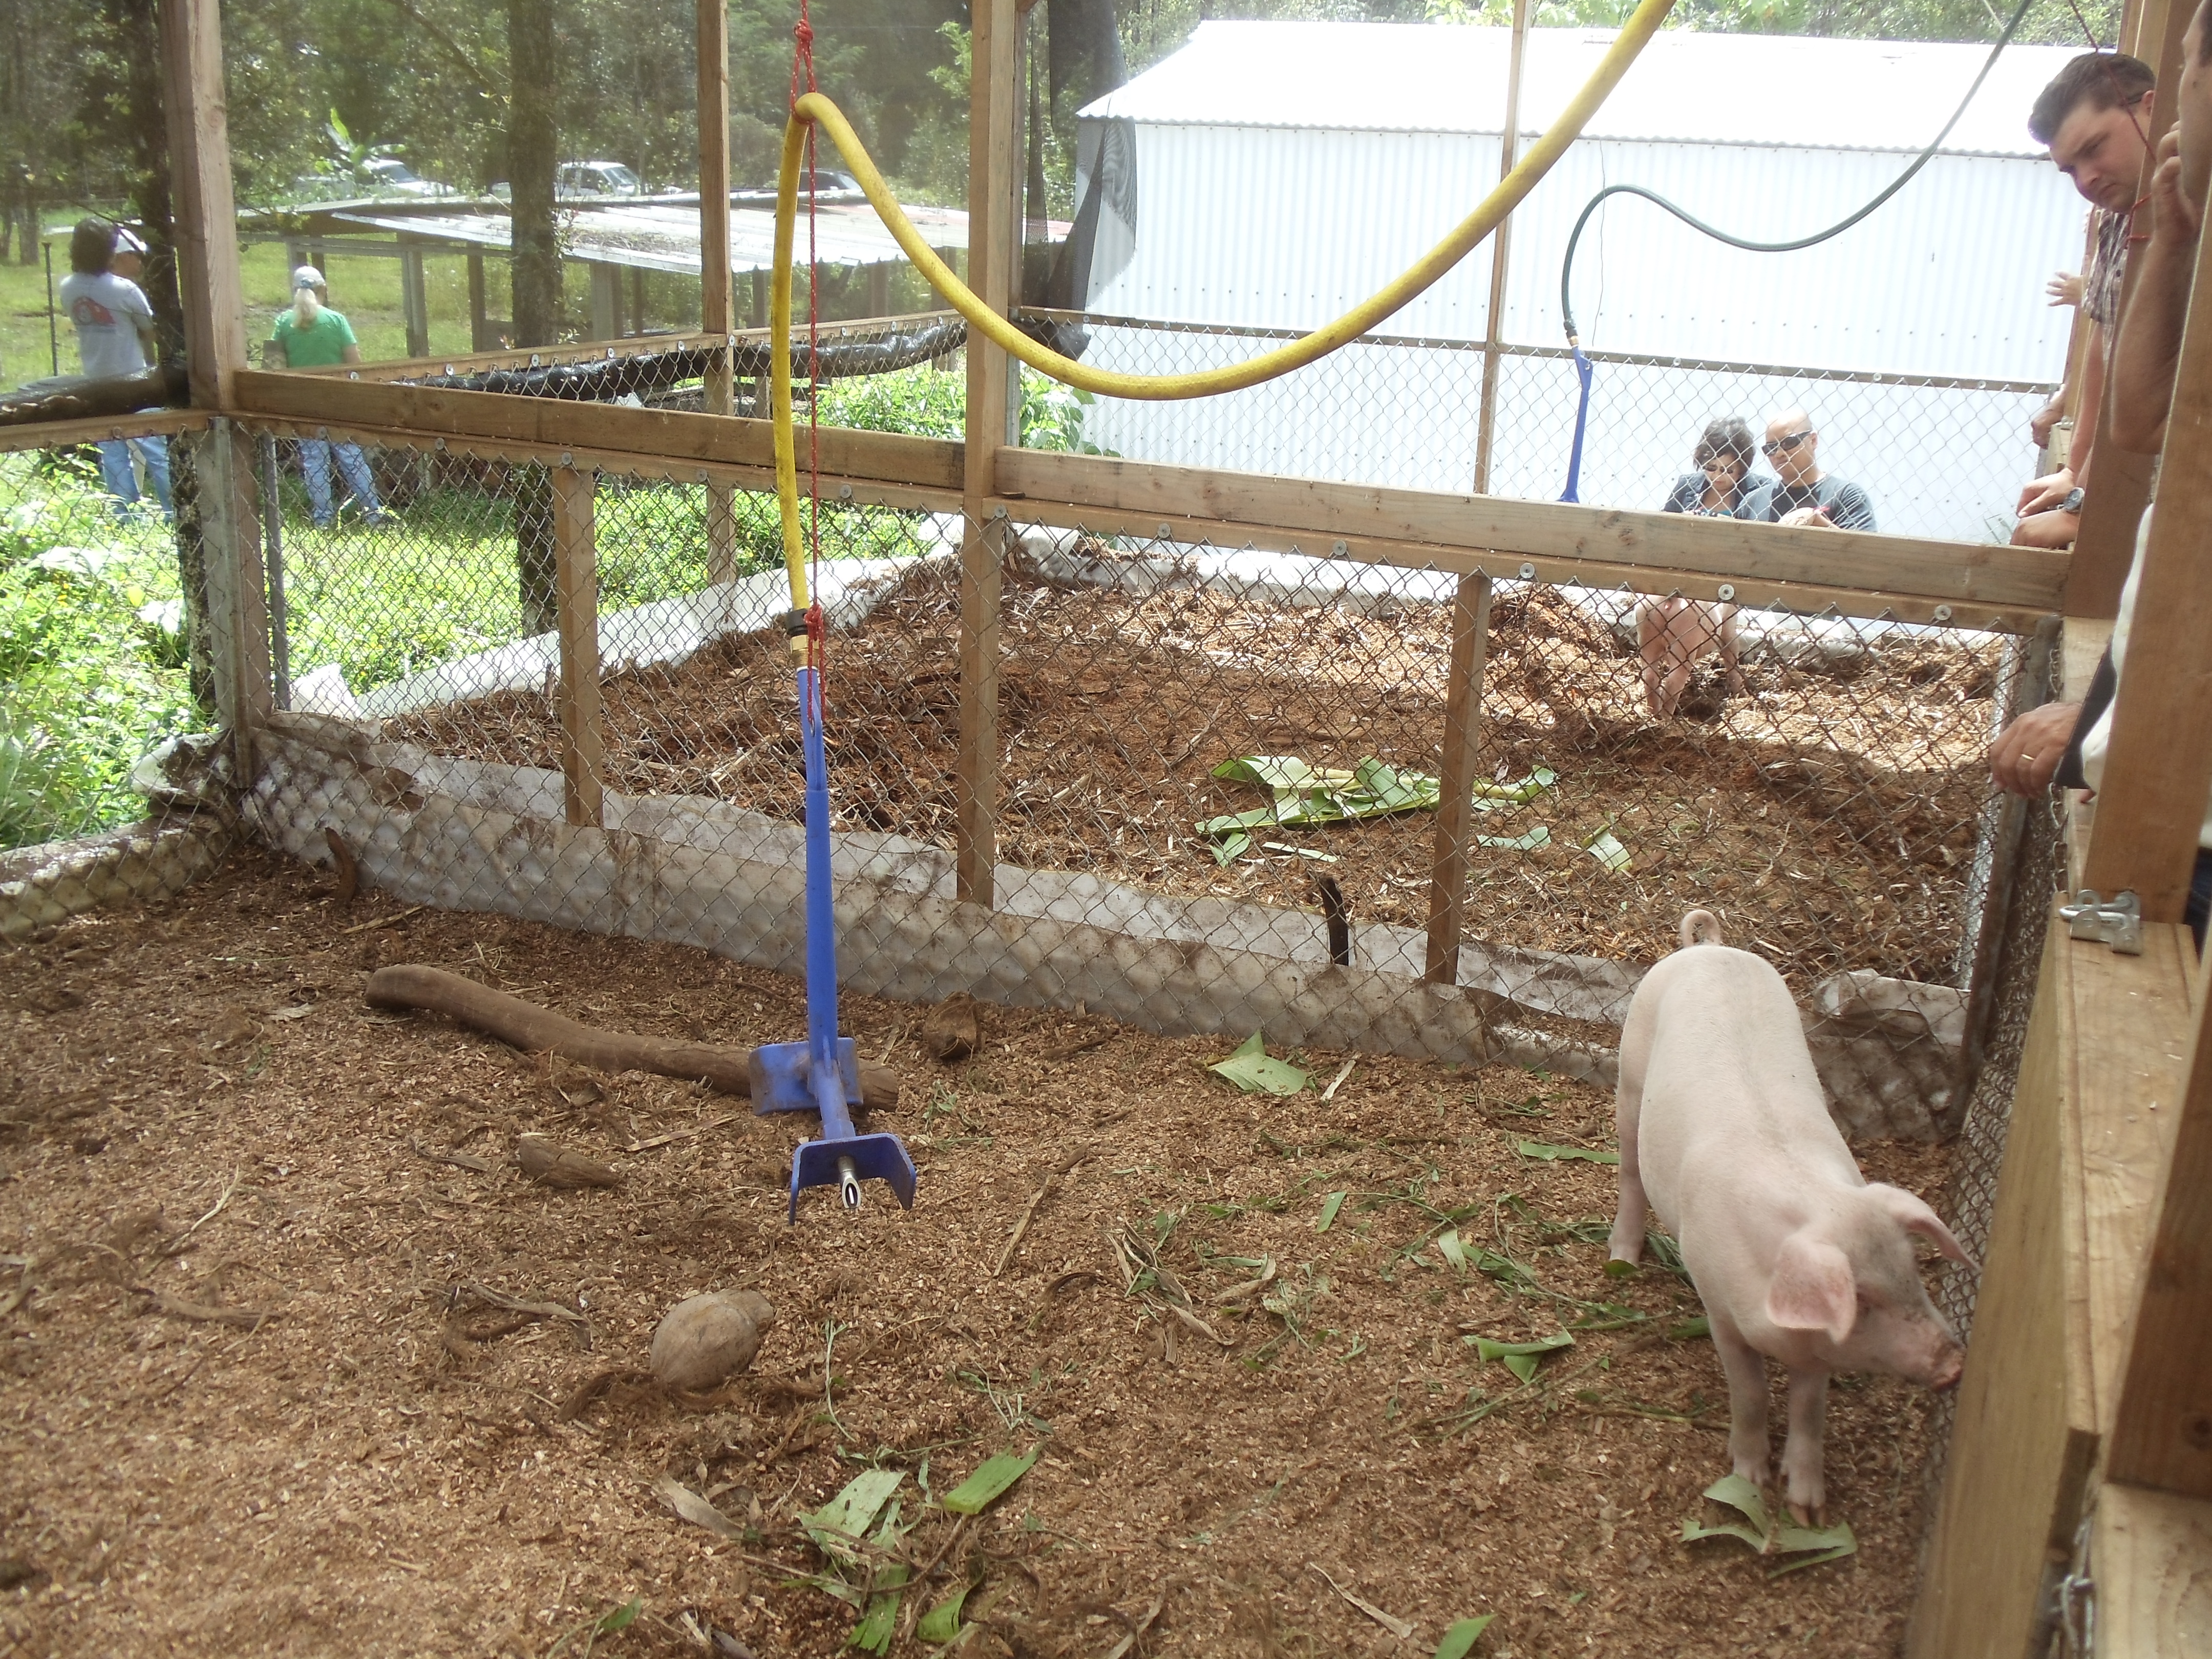 How To Start A Lucrative Pig Farming Business In Nigeria (Comprehensive Guide)